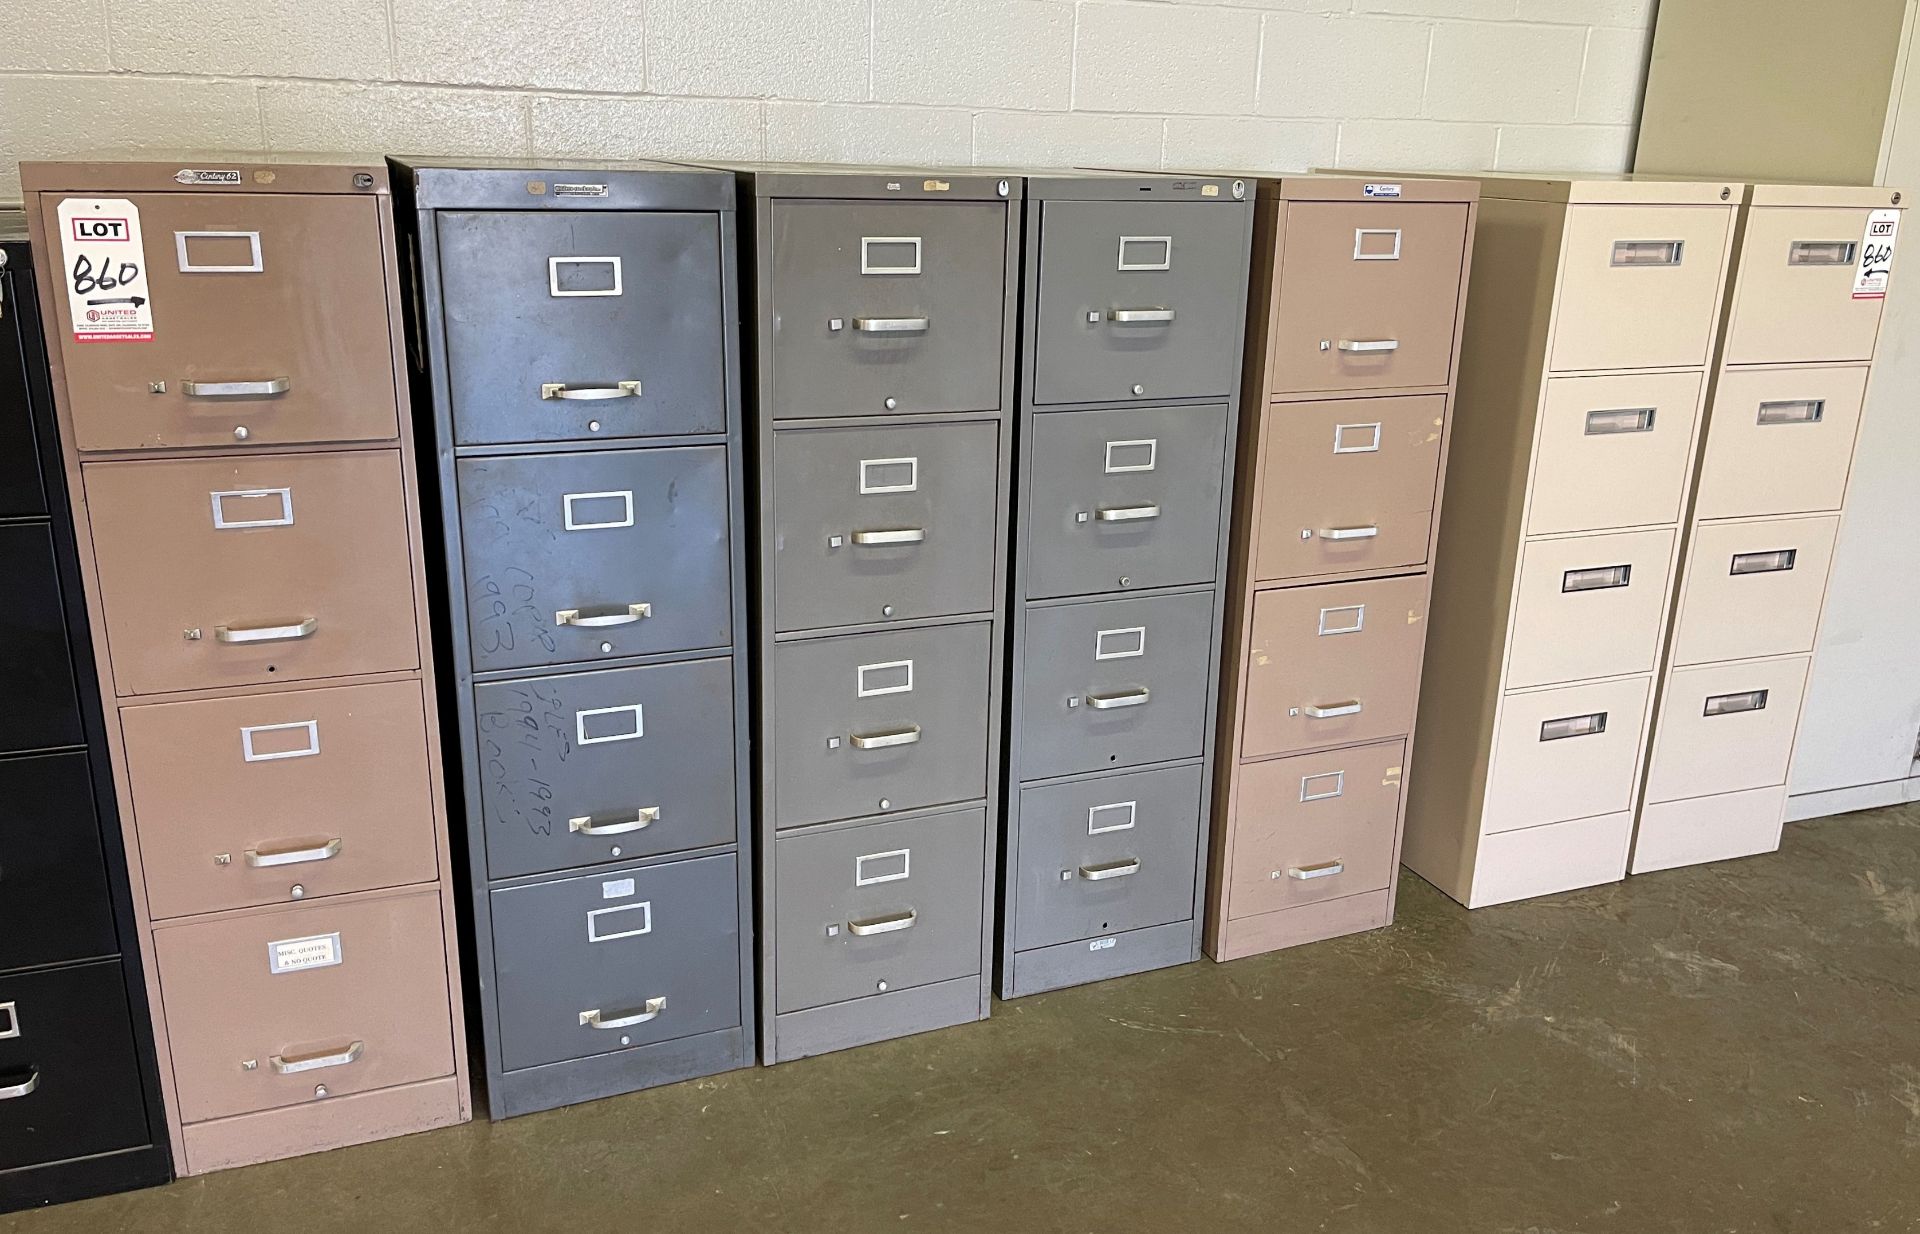 LOT - (7) 4-DRAWER FILE CABINETS, 15" X 27" X 52"